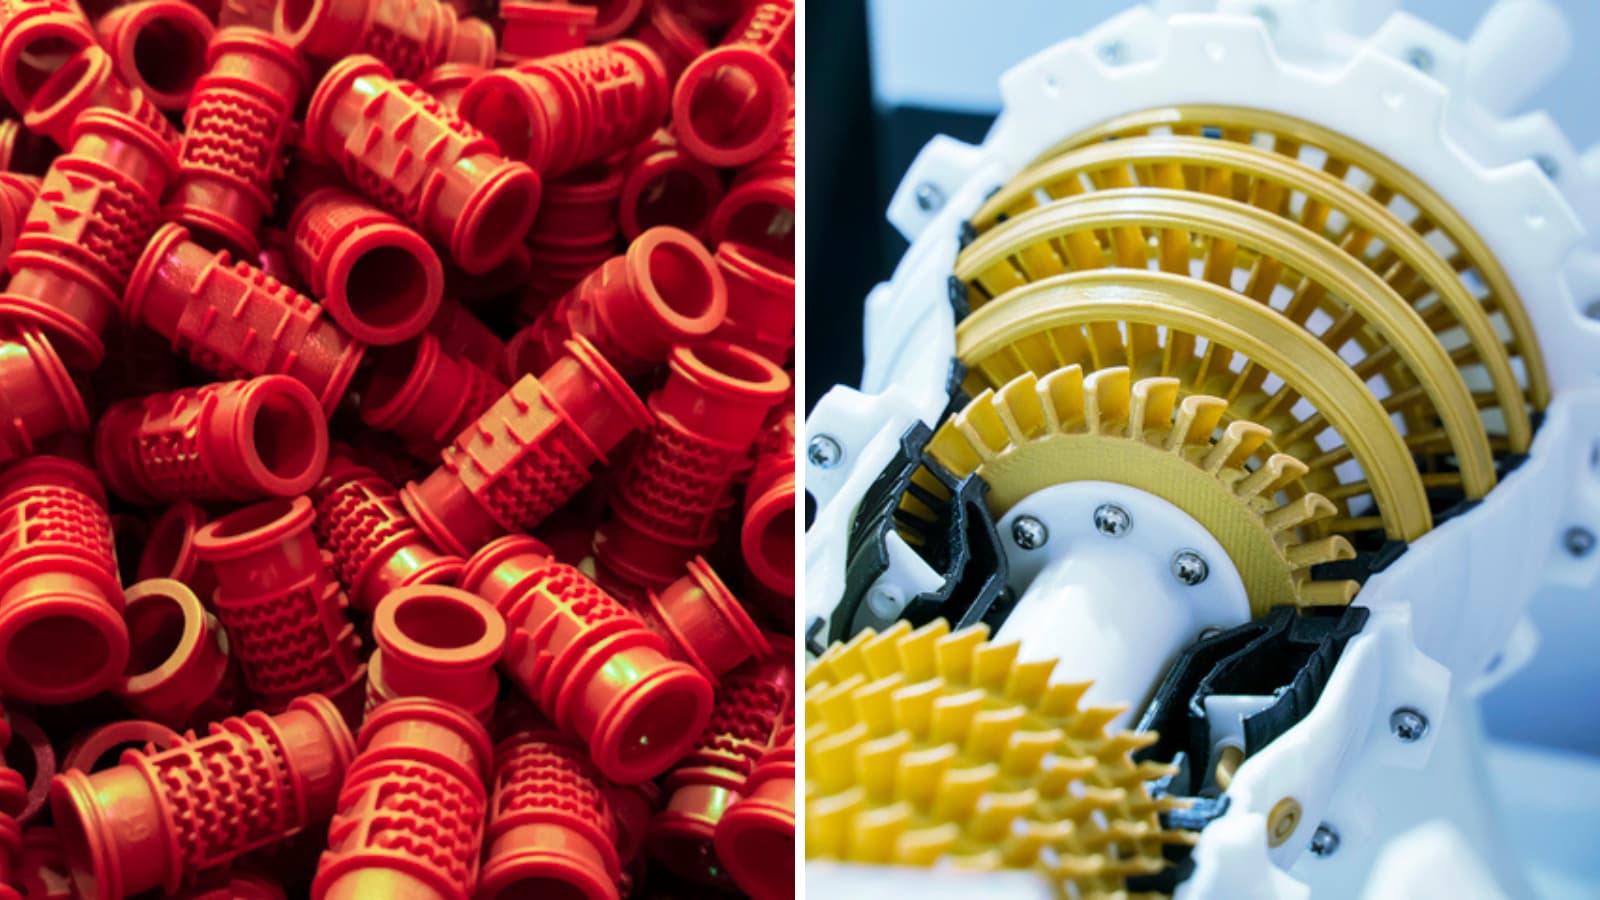 injection molded parts and 3d printed engine